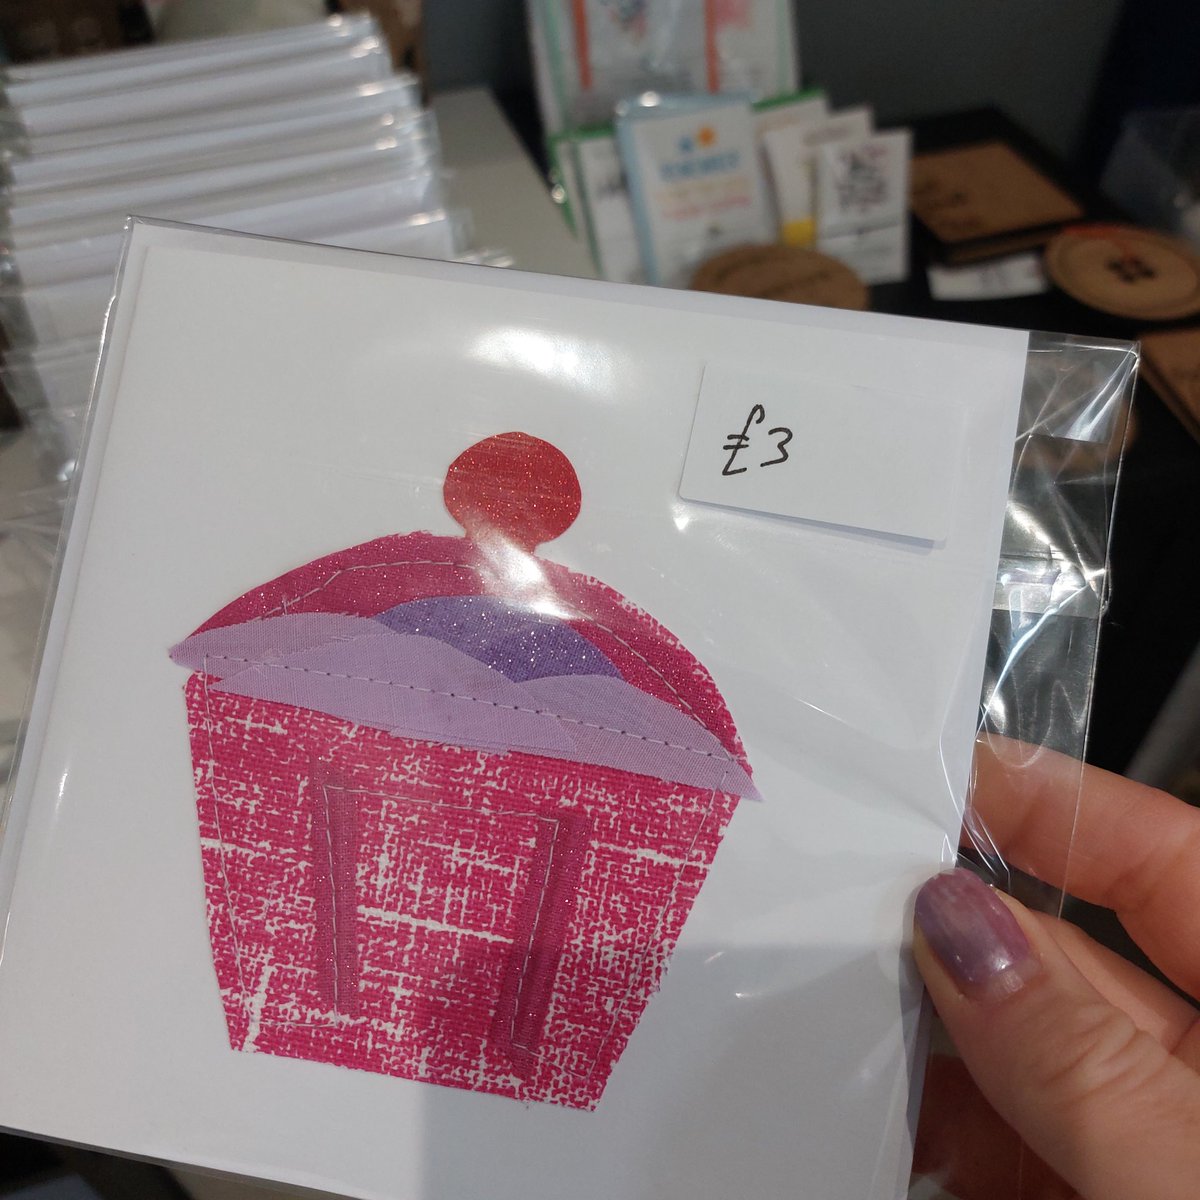 We've had a greetings card restock and have lots of gifts available for your events coming up over the weekend and next week!

Pop in today or tomorrow and see what we have to offer!
#oldhamhour
#mhhsbd #shoplocal